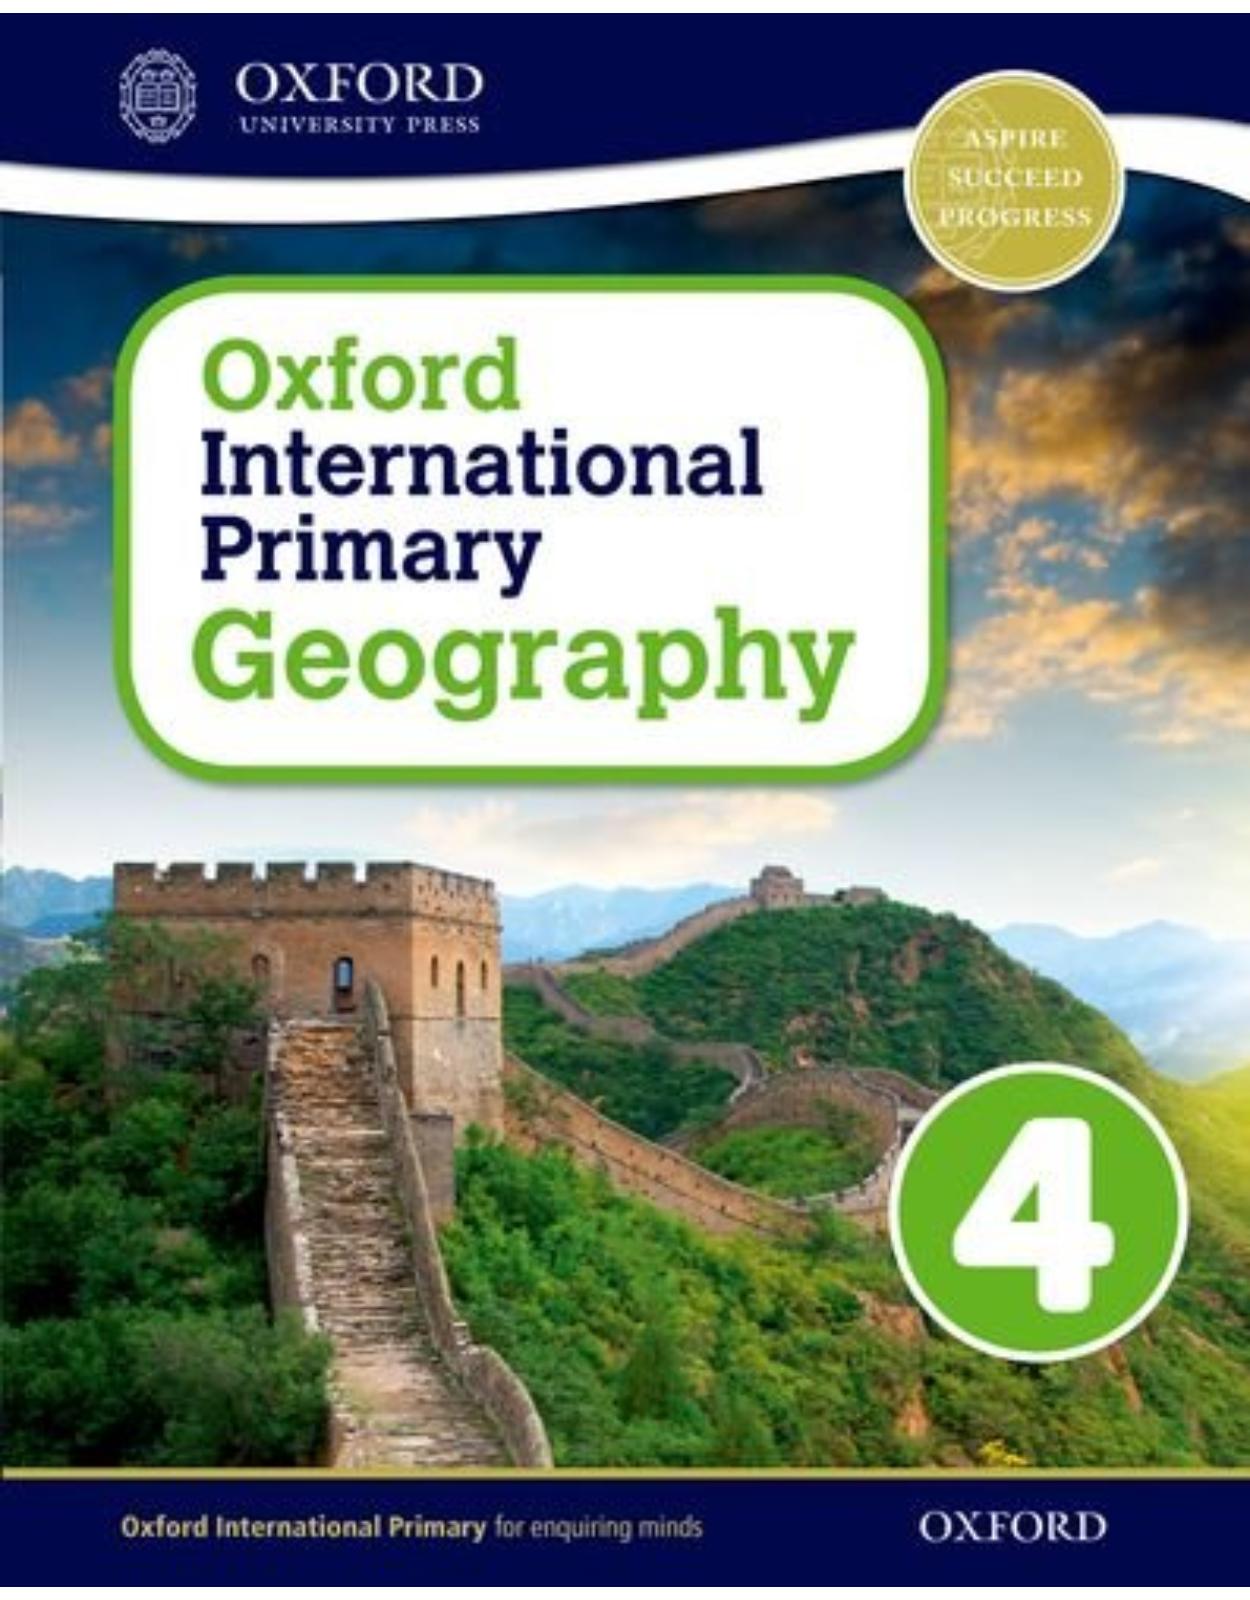 Oxford International Primary Geography: Student Book 4